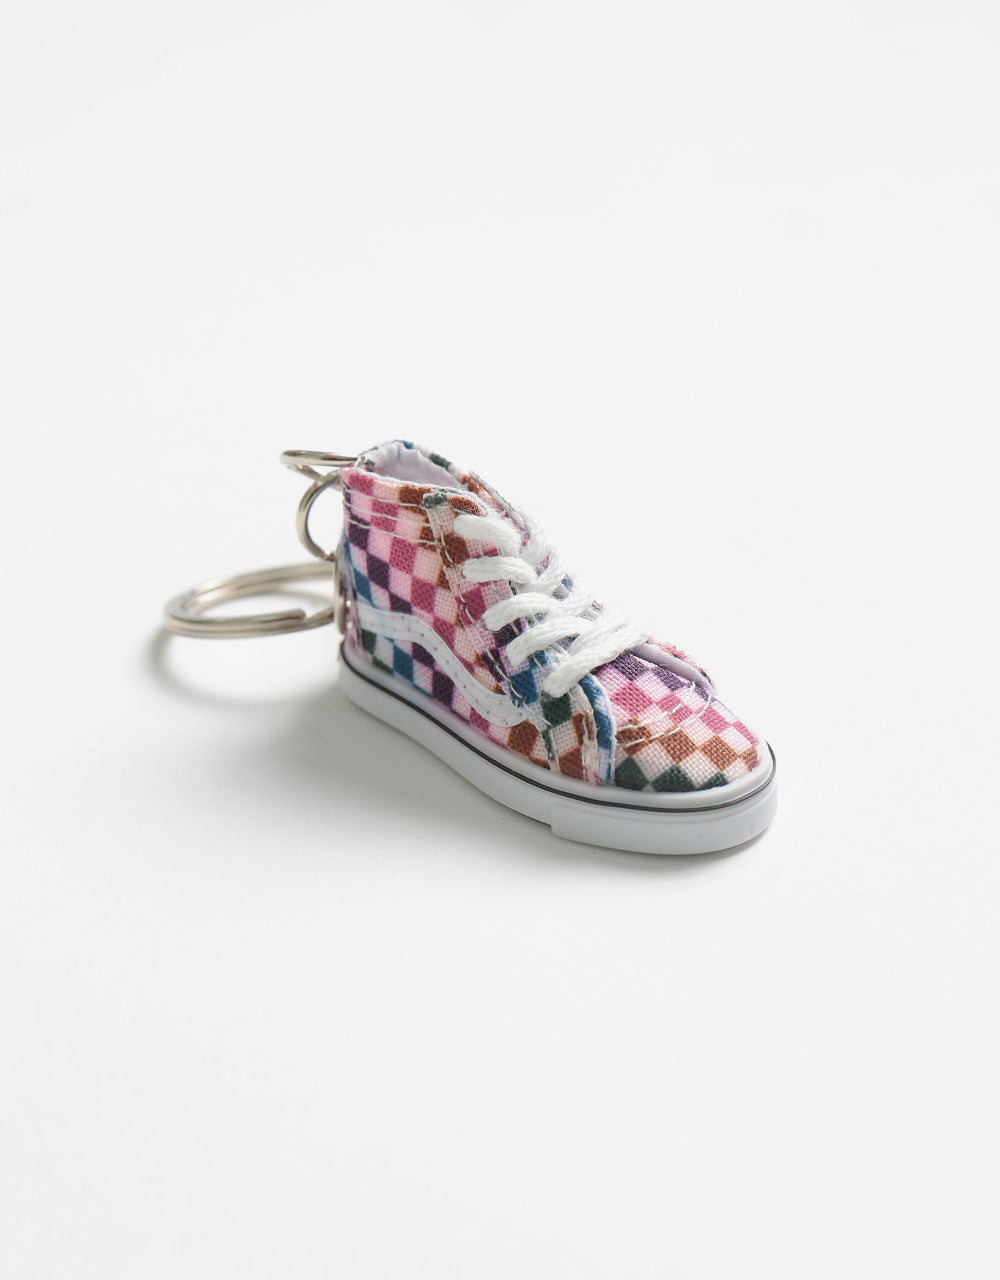 Vans Womens Sk8-Hi Keychain - Dusted Check